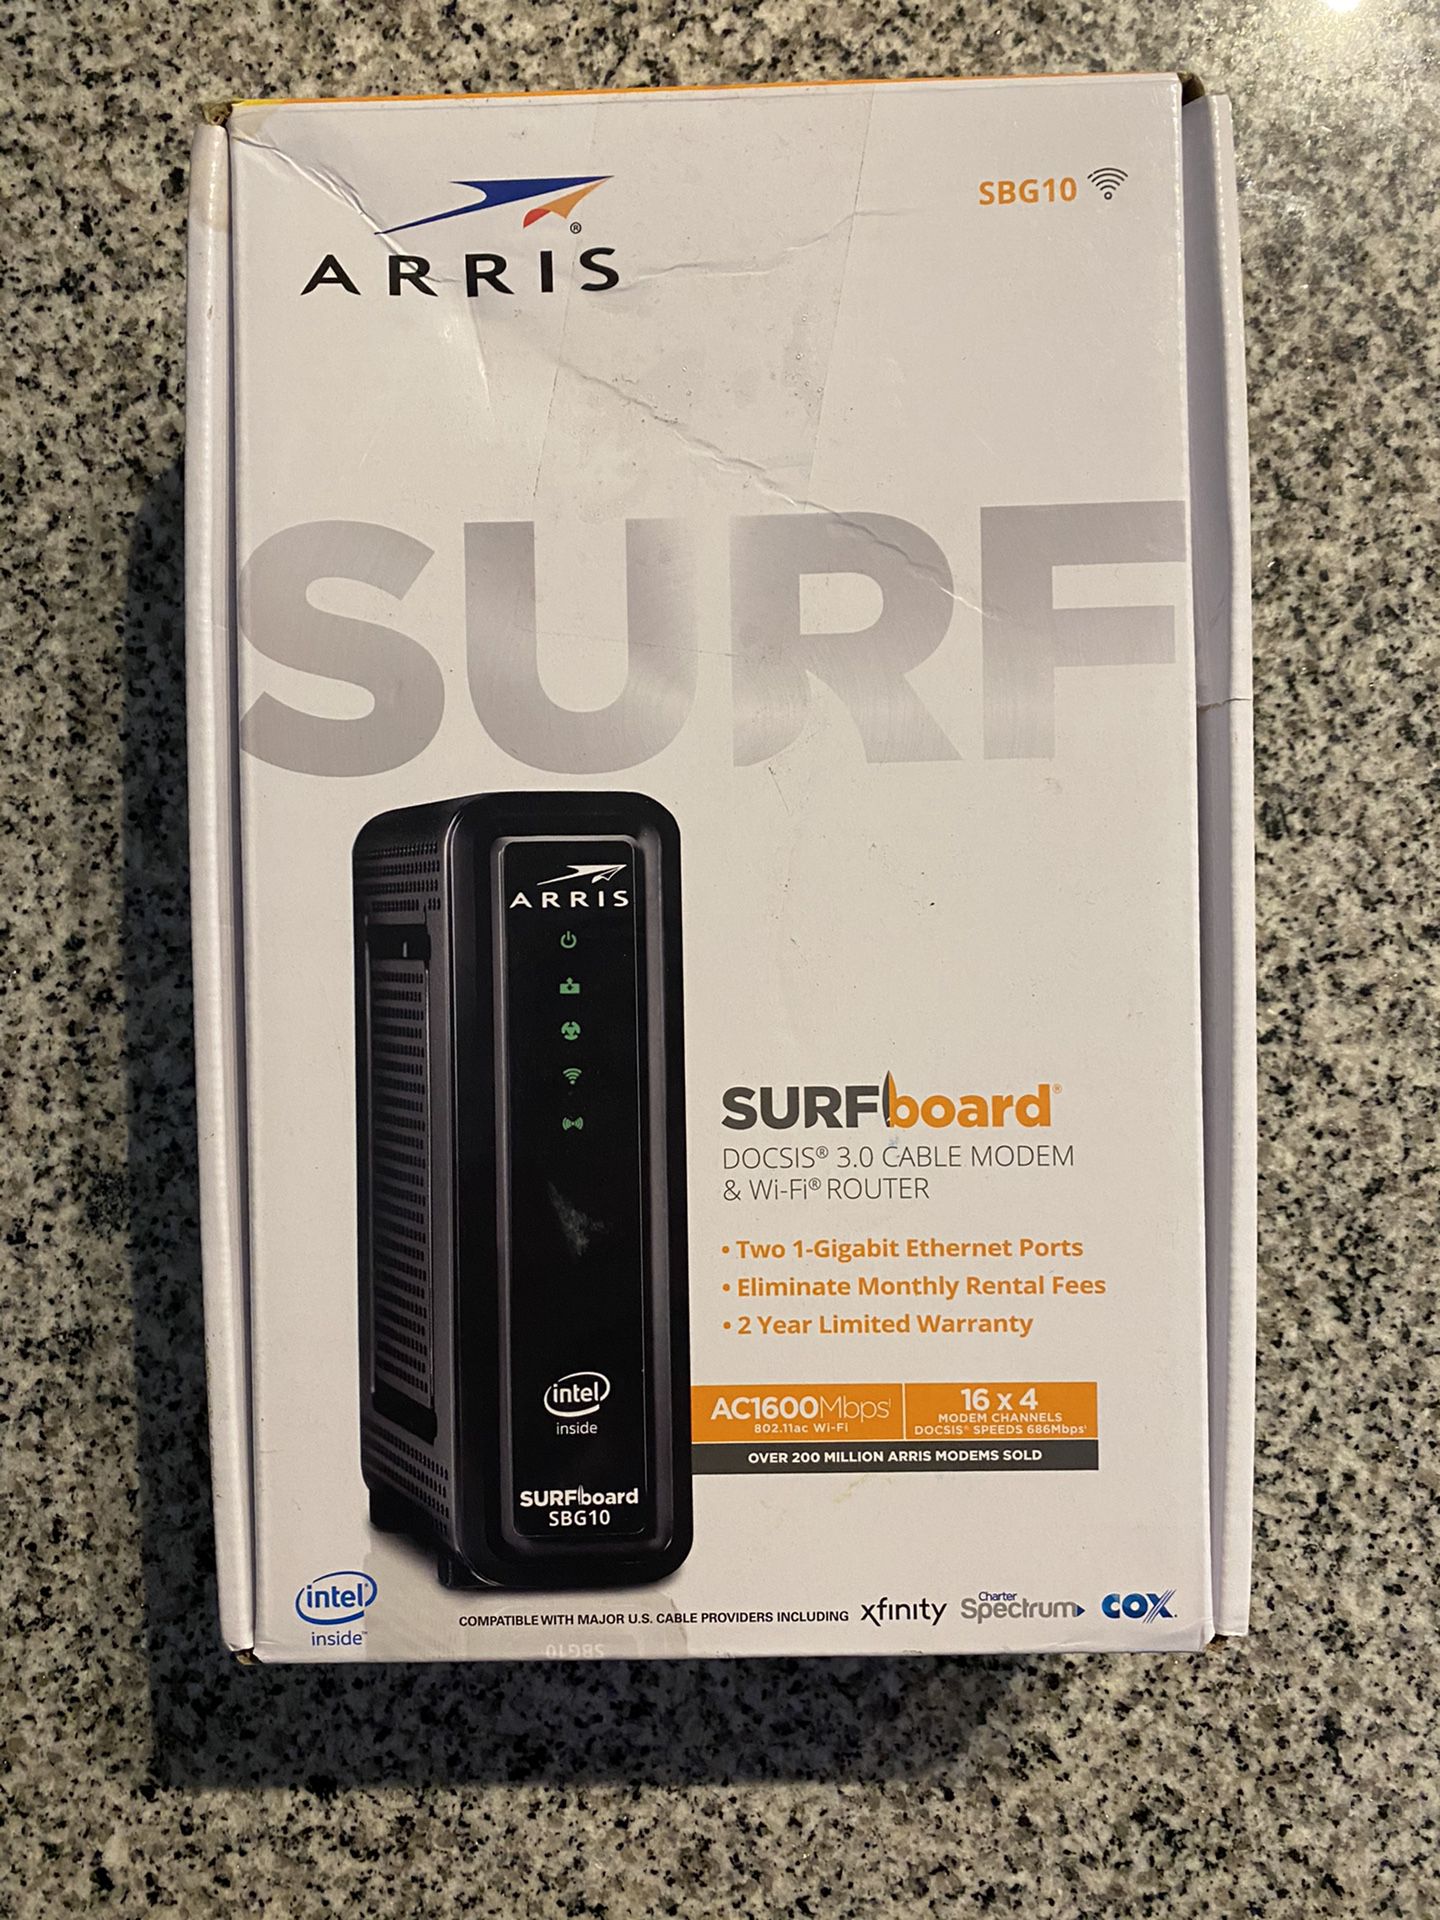 Arris Surfboard SBG10 Cable Modem and WiFi Router